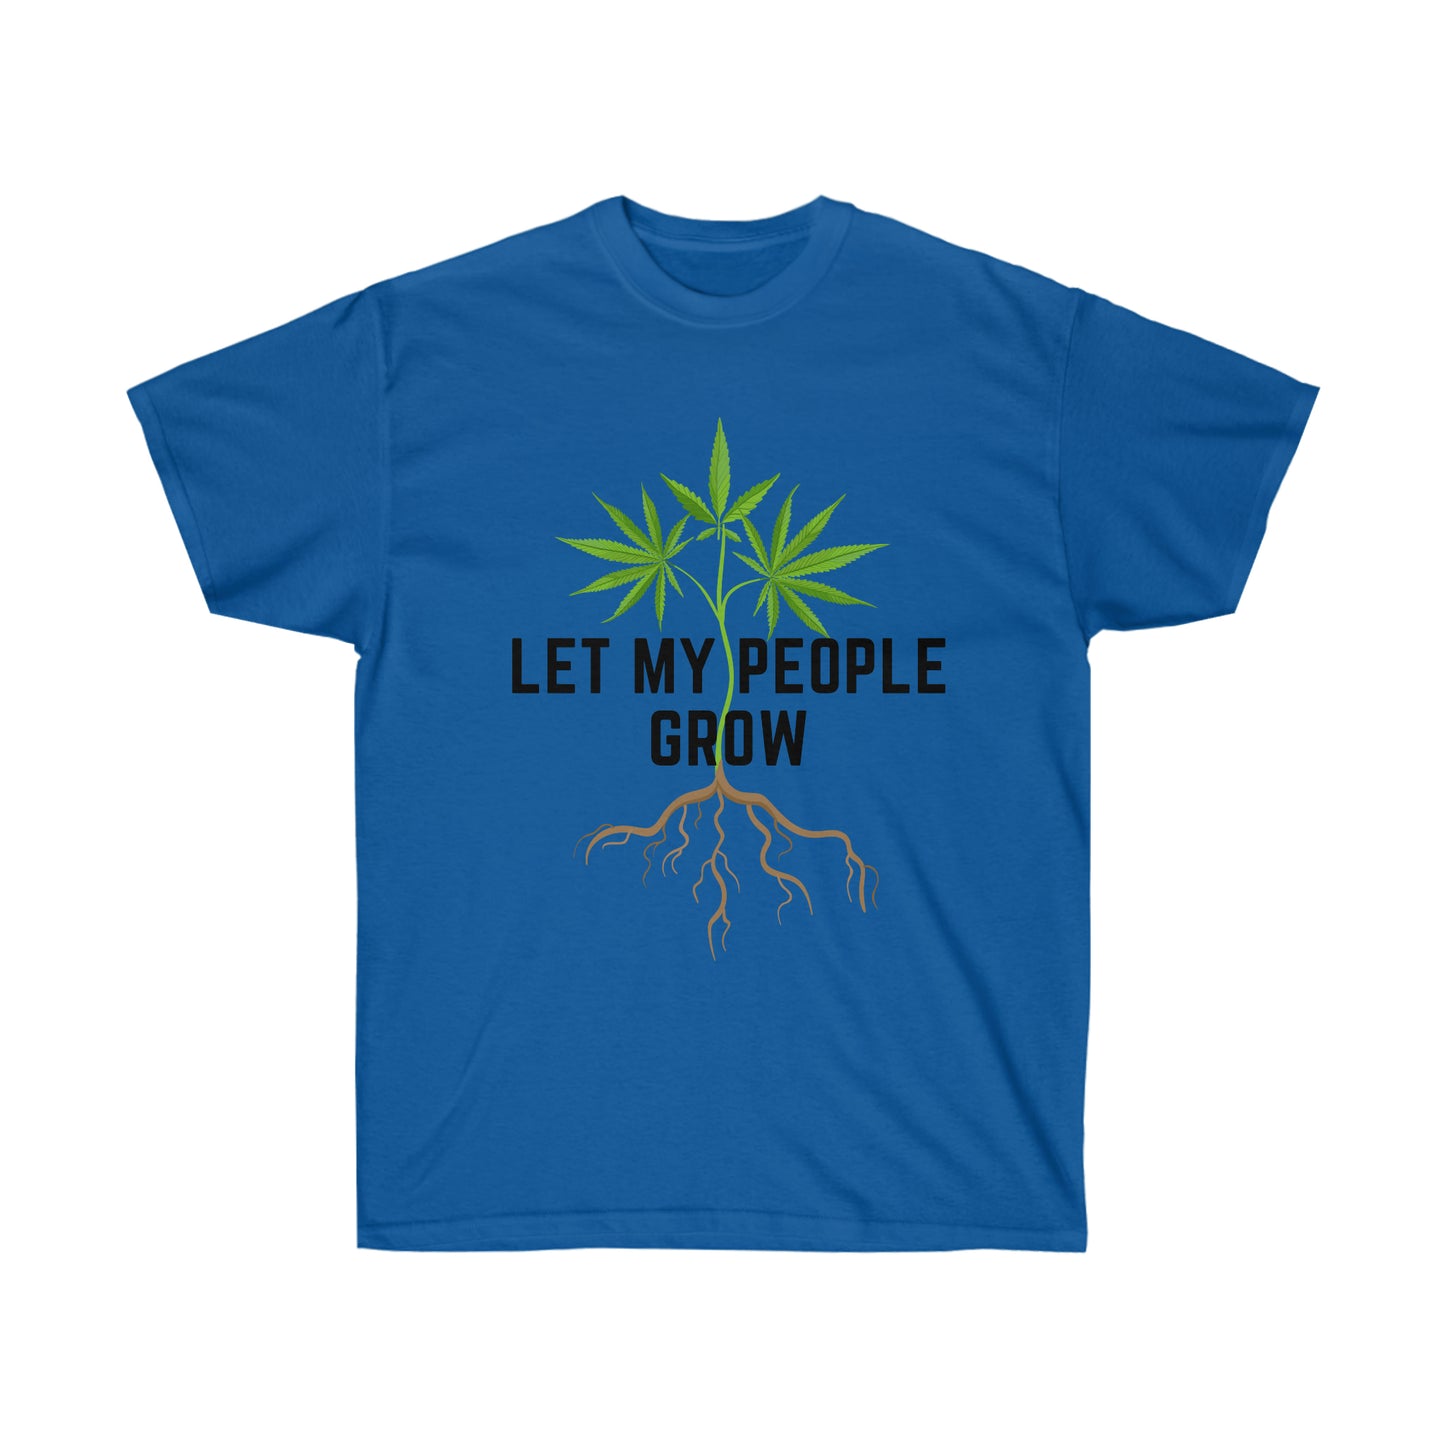 Let the Let My People Grow T-Shirt my people grow t-shirt.